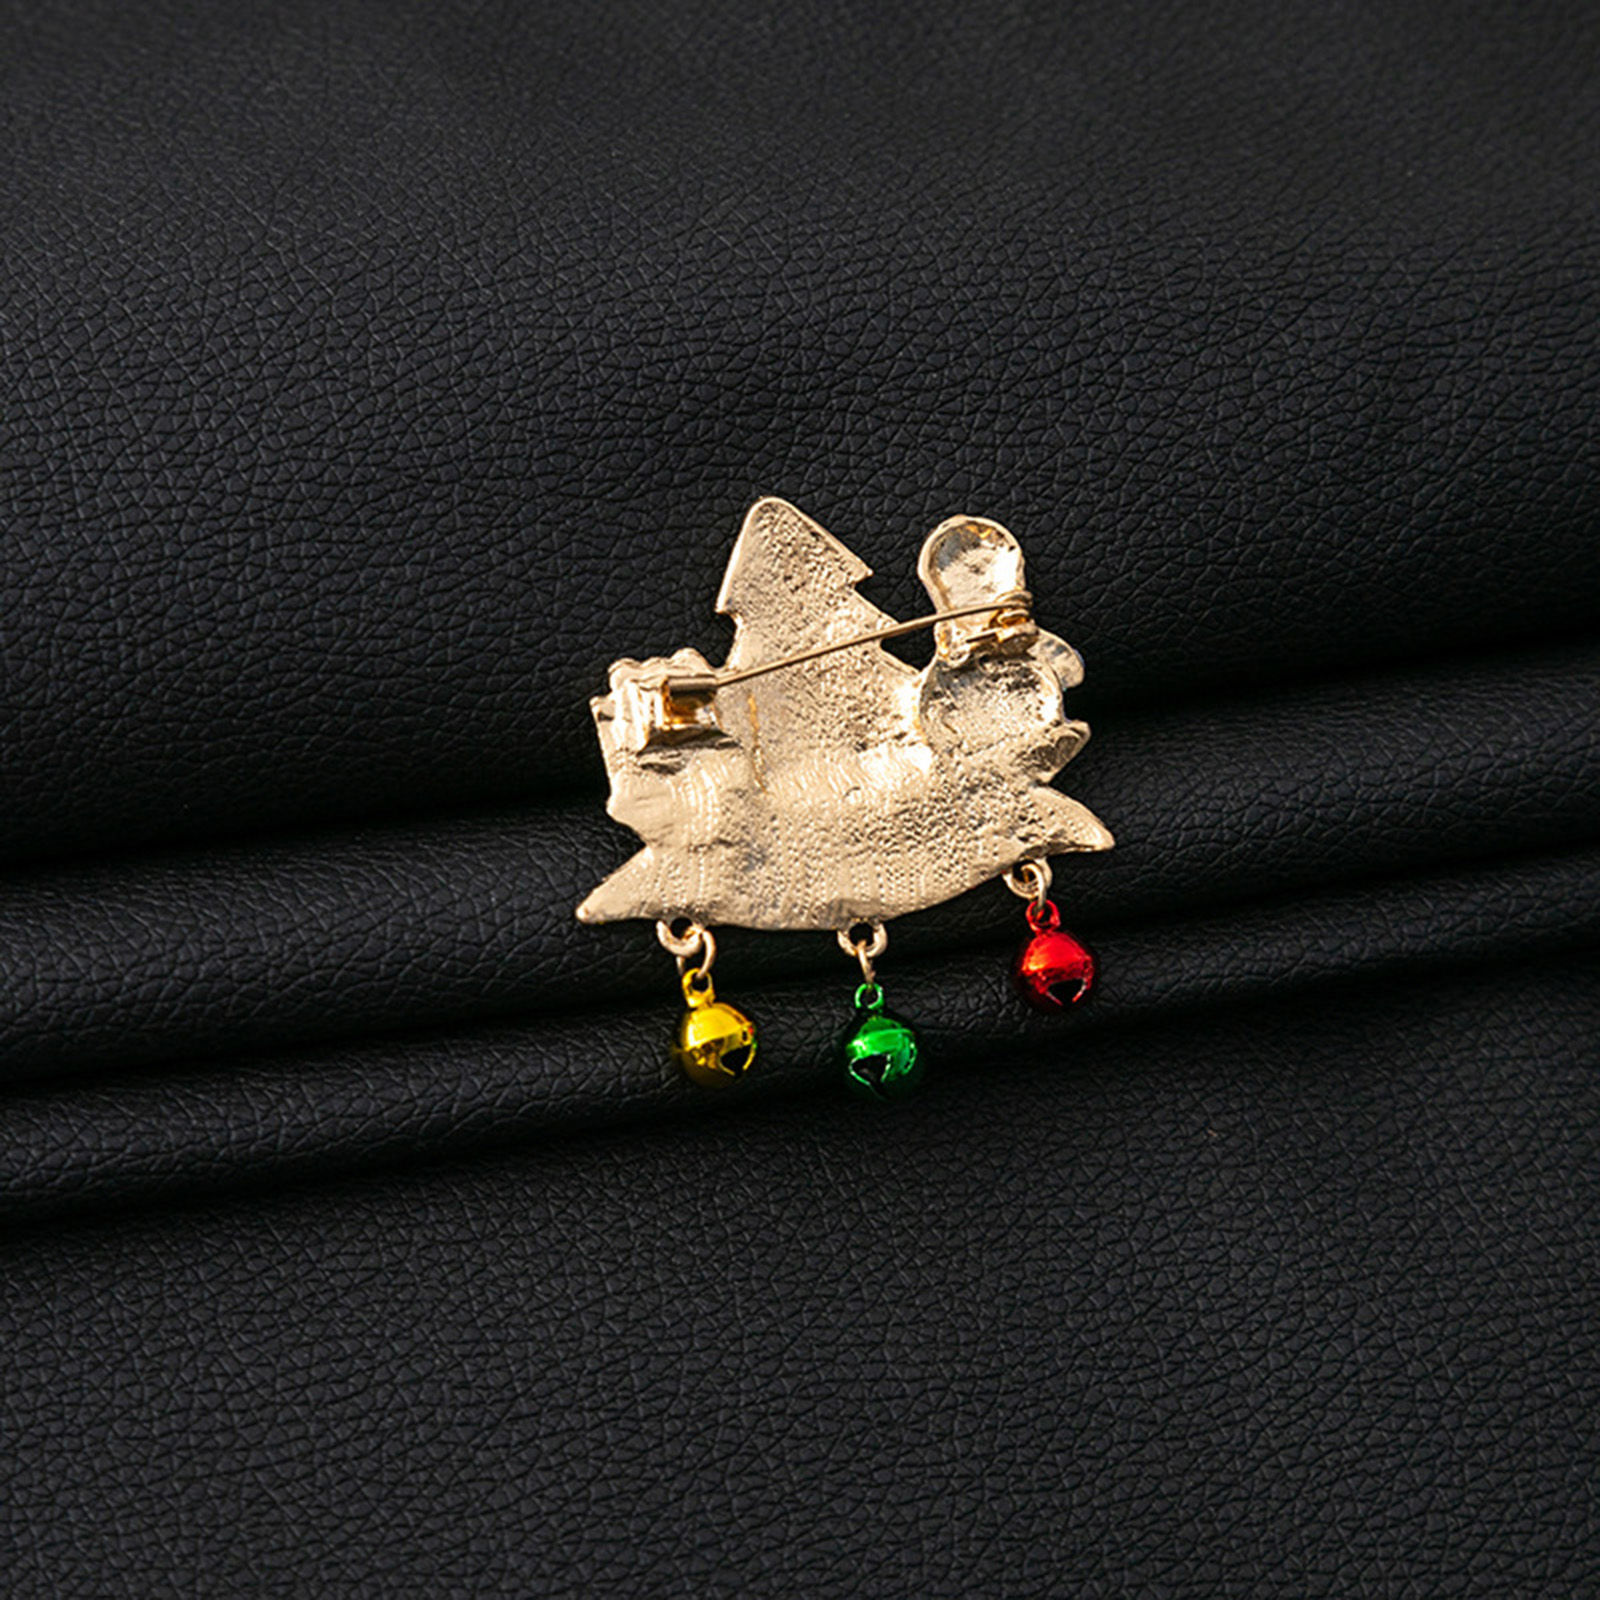 Picture of Retro Pin Brooches Christmas Tree Christmas Snowman Gold Plated White Enamel 5.8cm x 5.1cm, 1 Piece